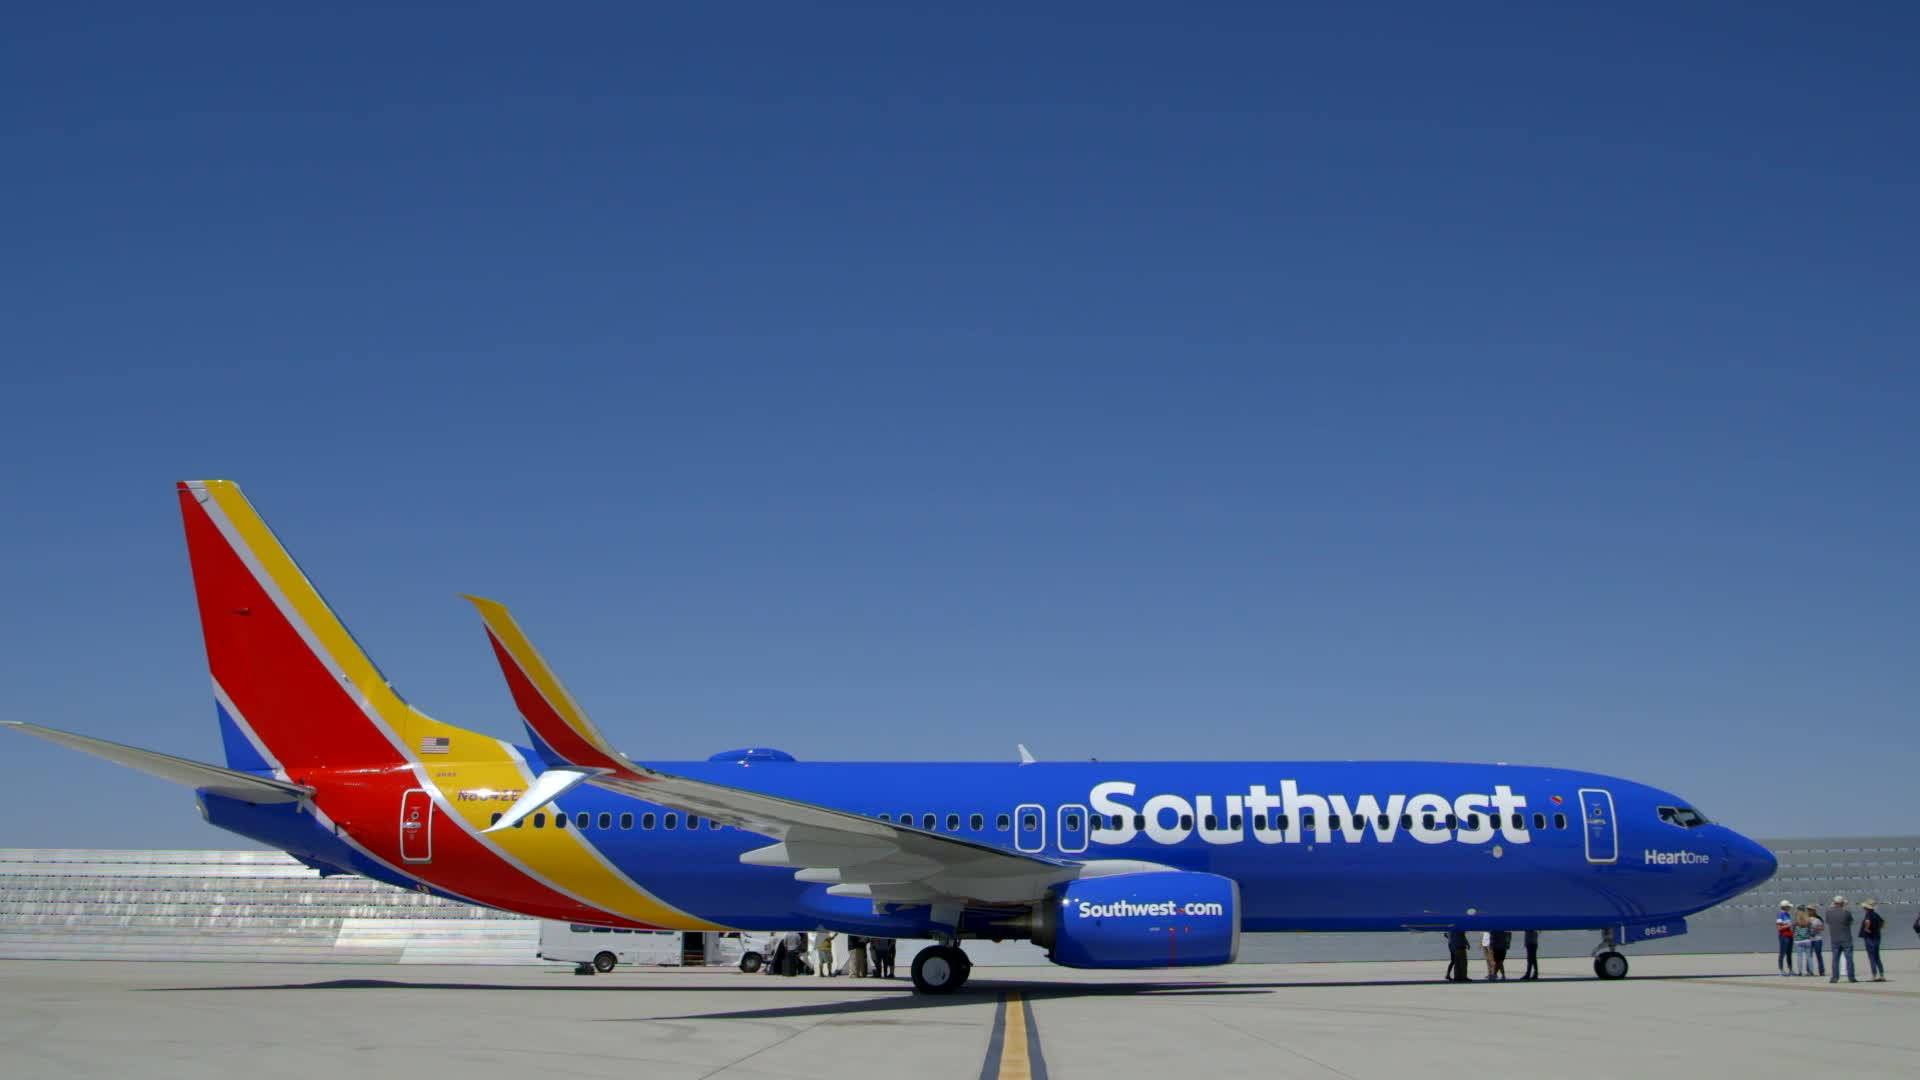 Southwest Airlines Parked Blue Airplane Wallpaper